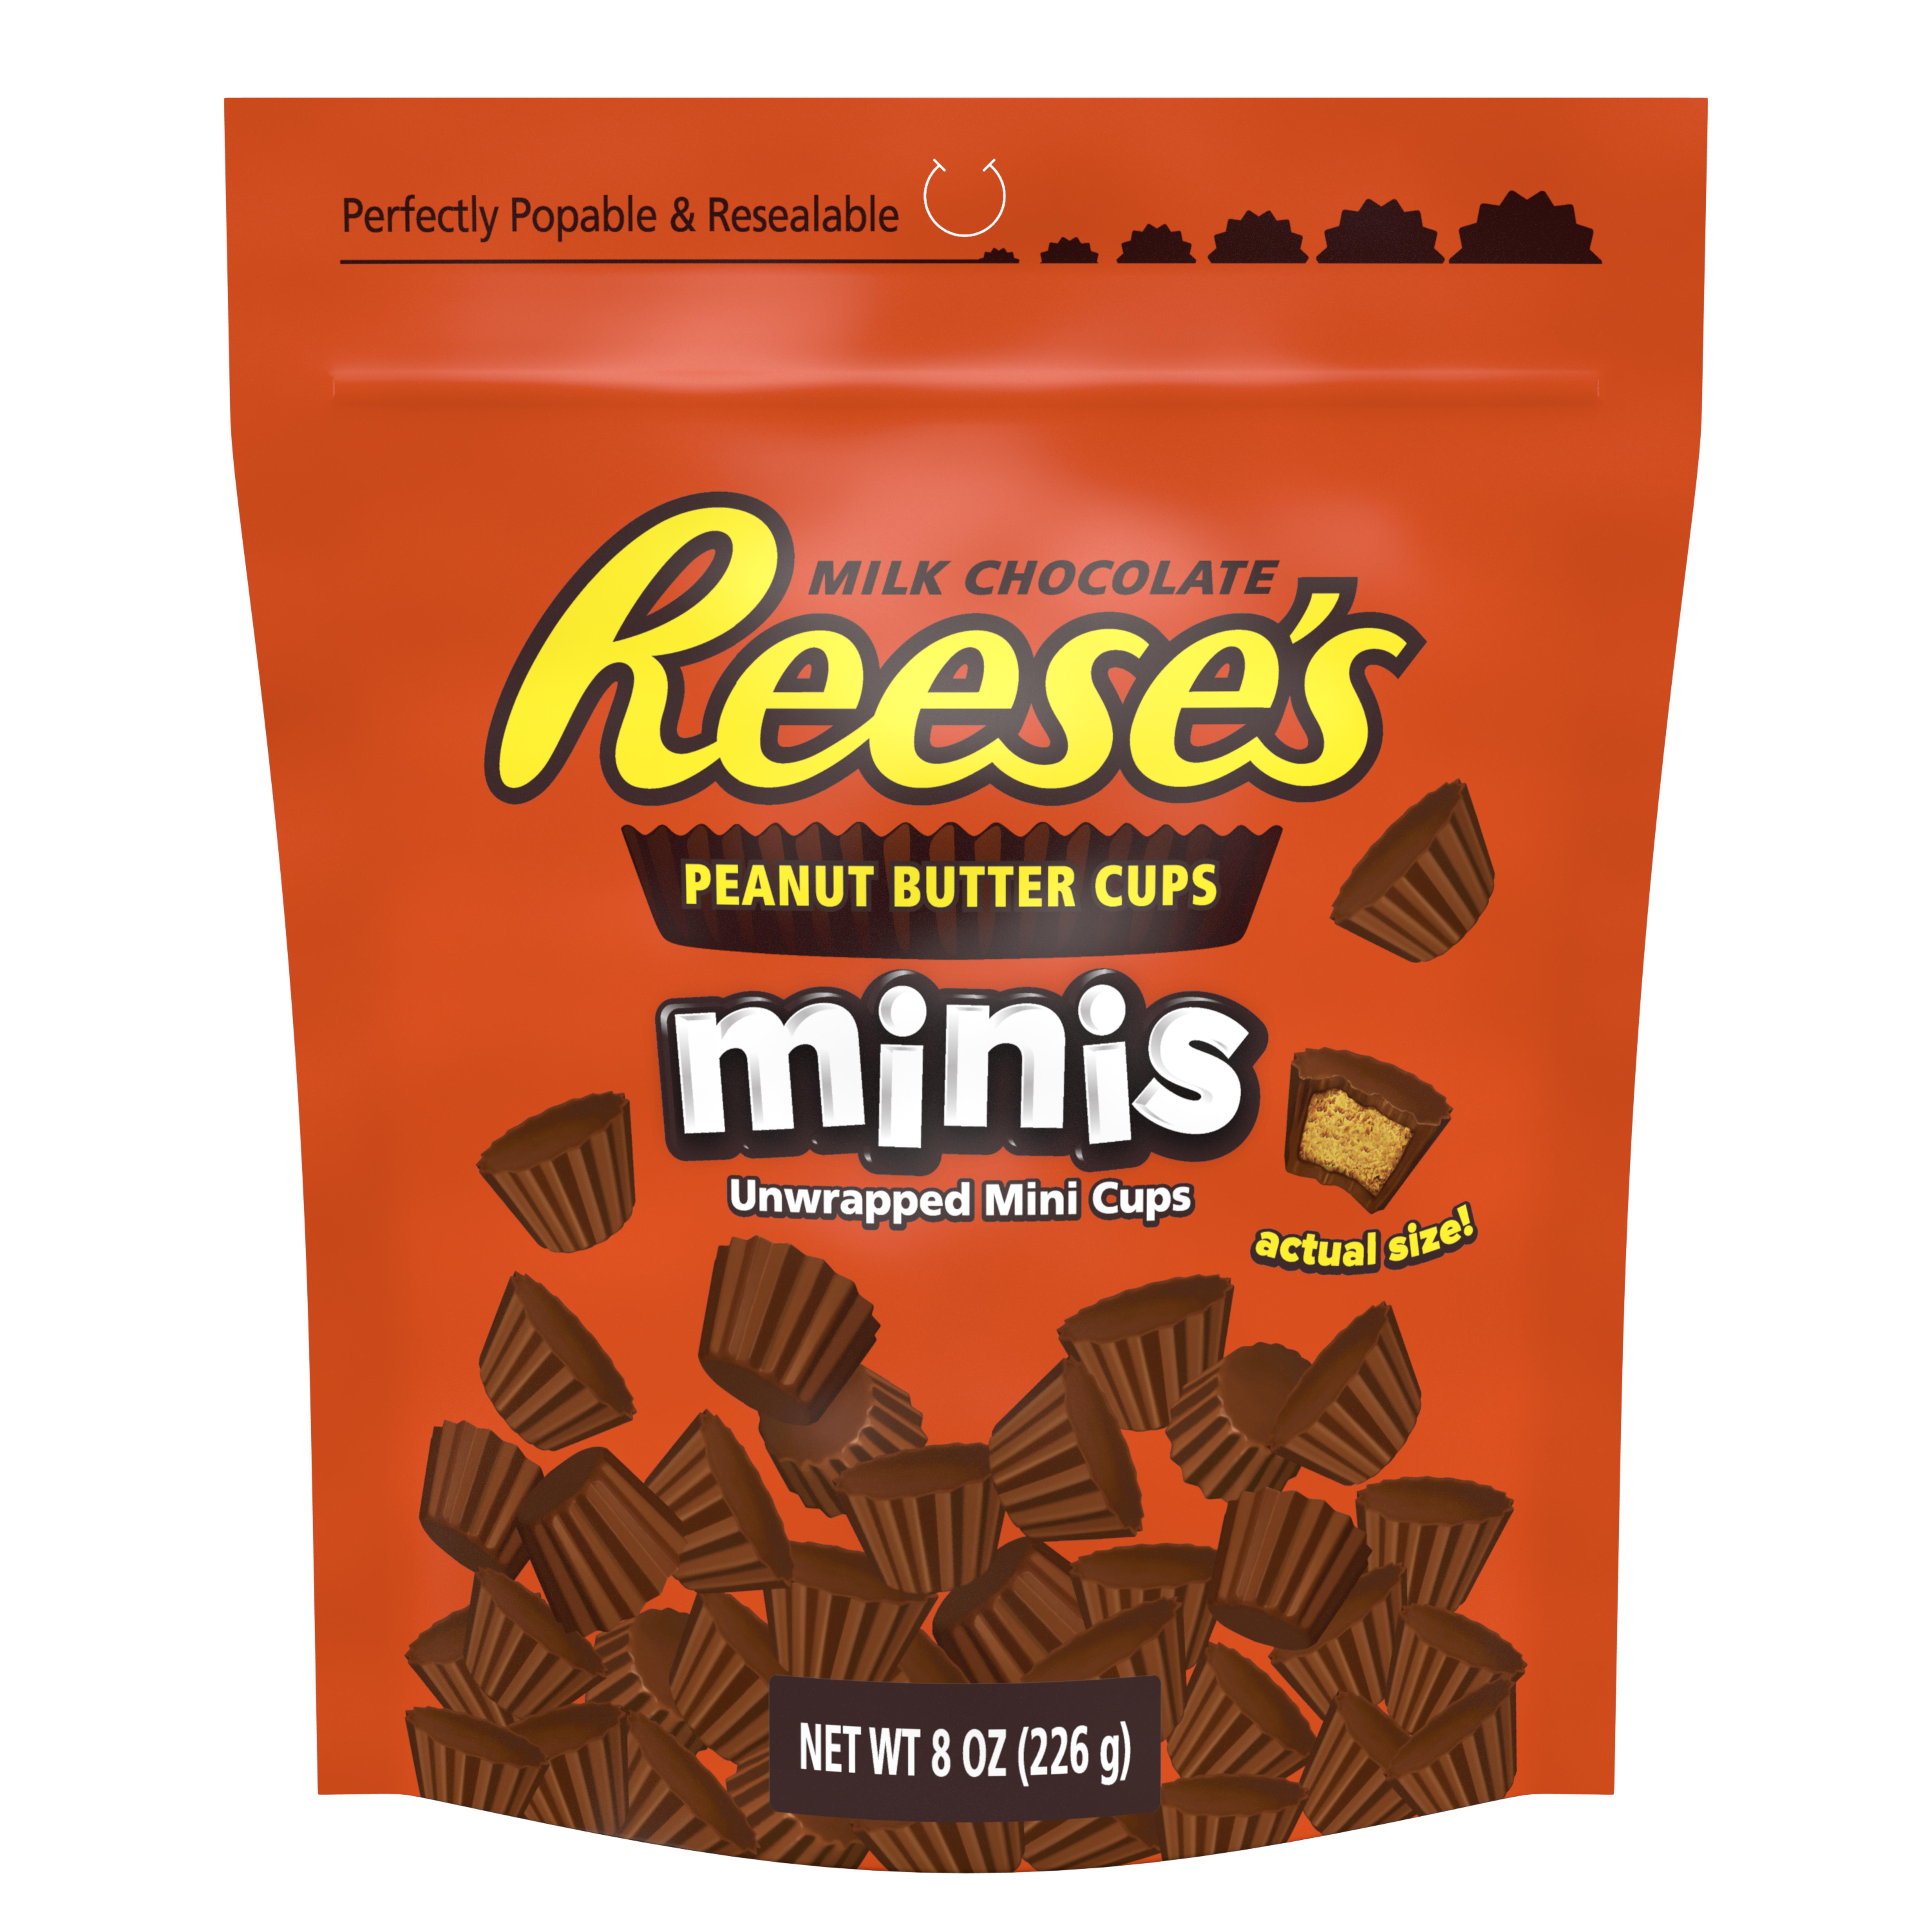 Reese's Minis Peanut Butter Chocolate Candy, 8 Oz., 4 Count - image 1 of 9